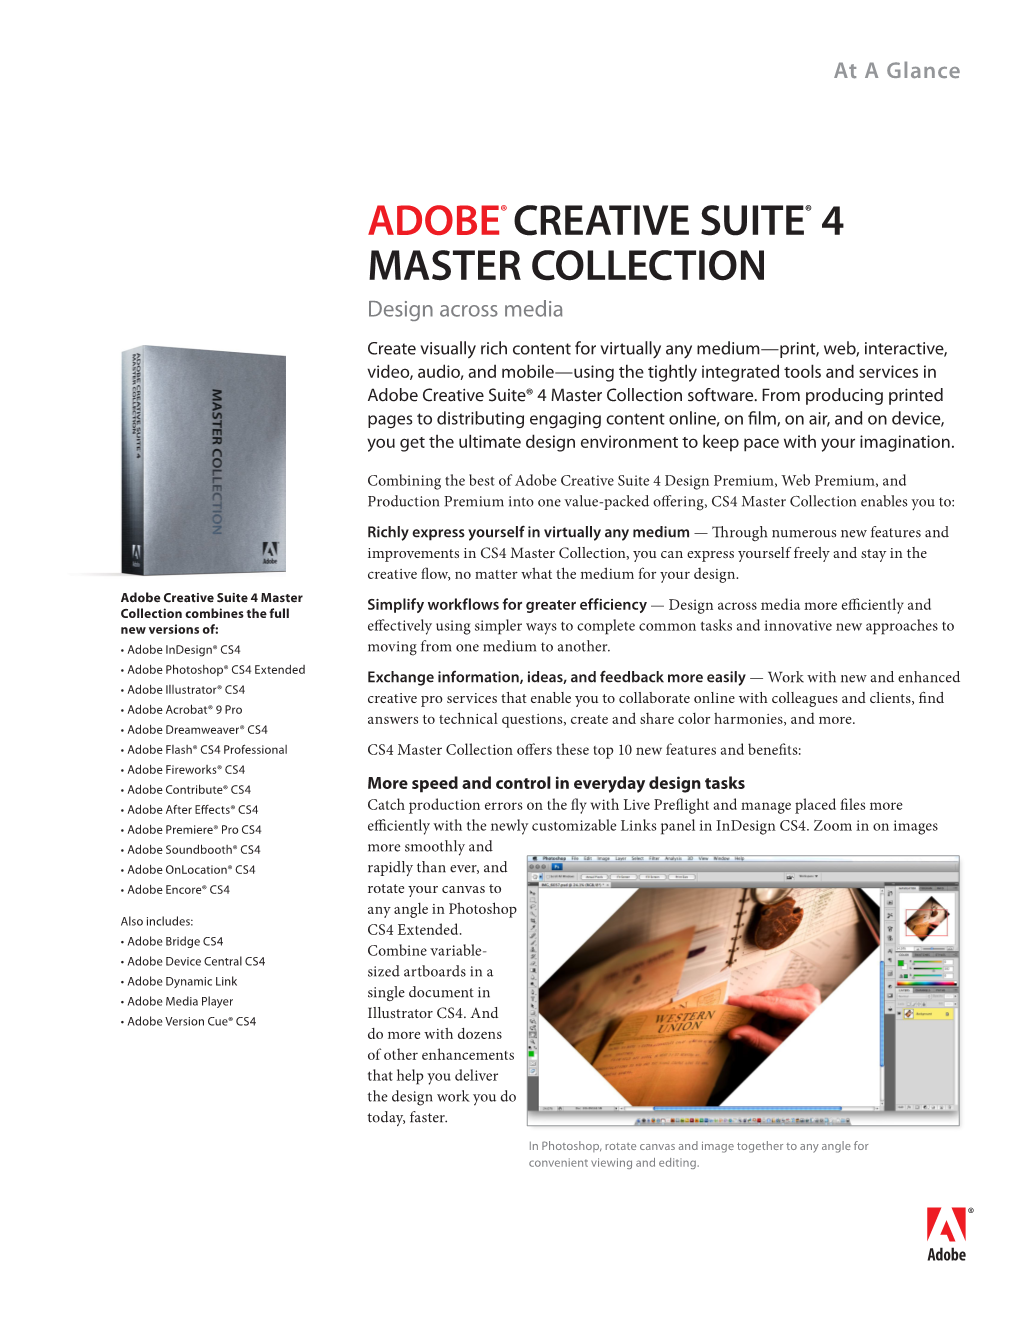 Adobe Creative Suite 4 Master Collection at a Glance